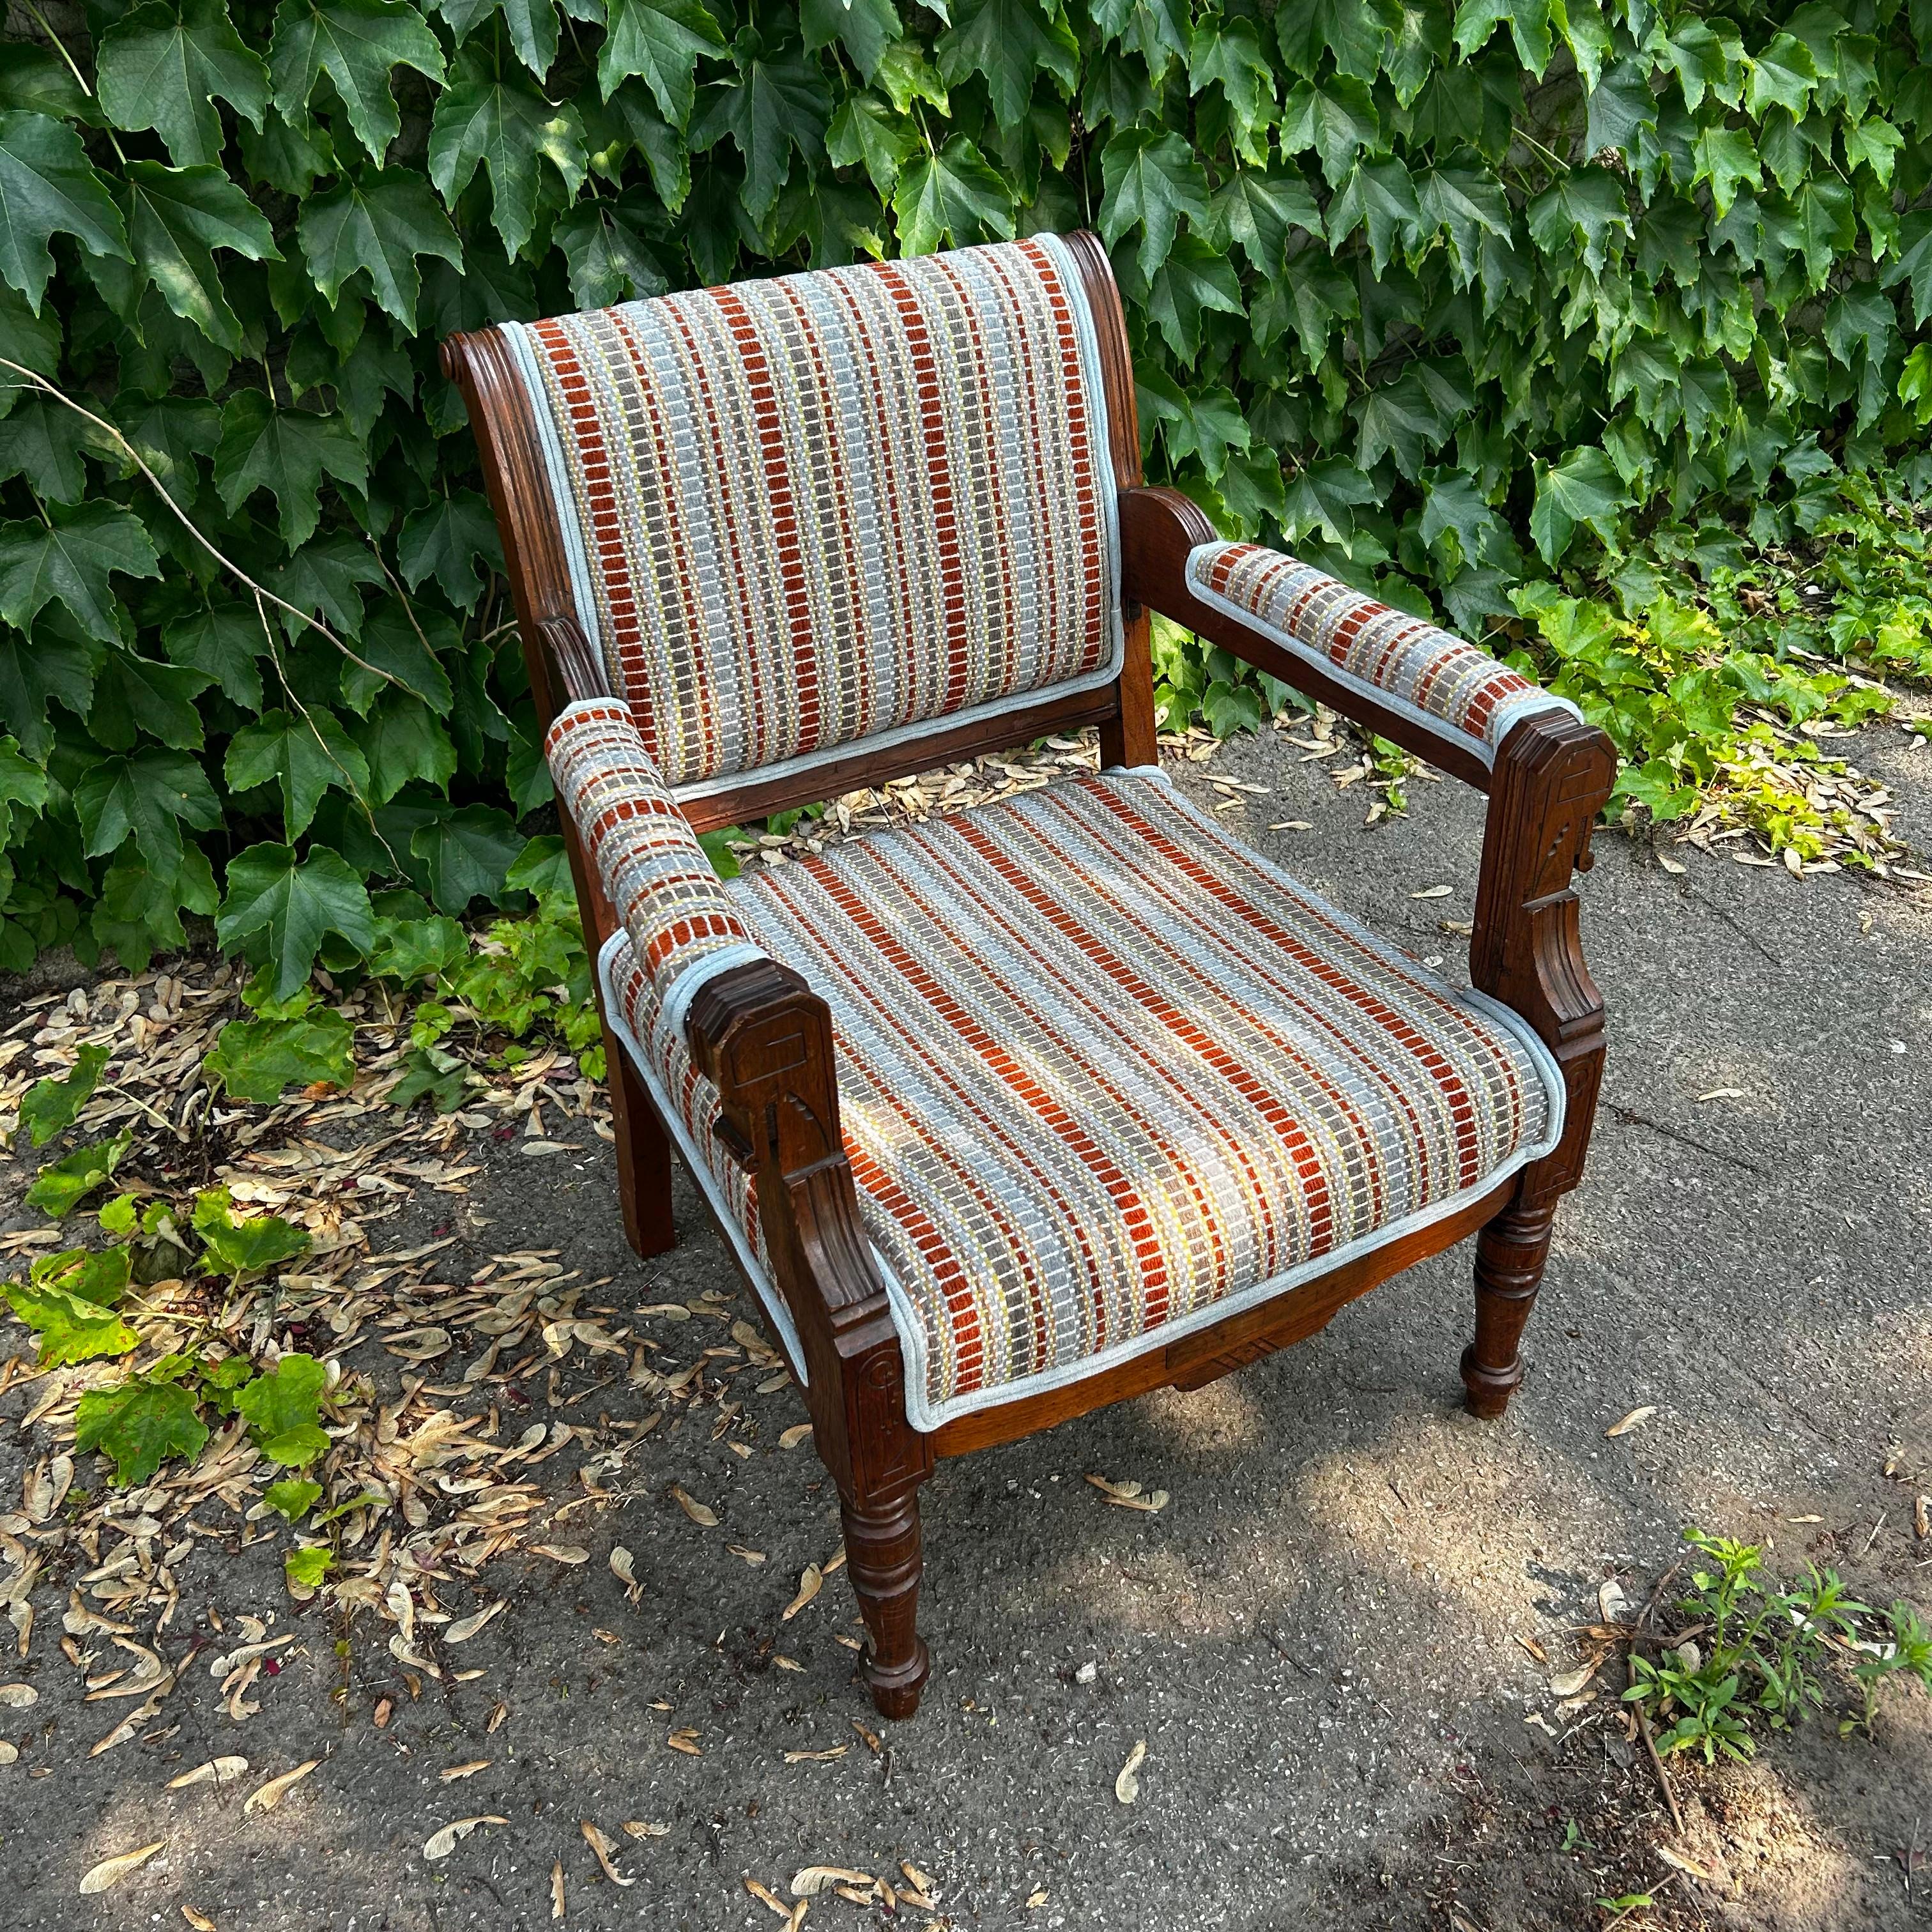 Curiously carved, this vintage wood-framed armchair deserved a great upholstery fabric to complement her Eastlake frame. Delicate geometry, shallow etchings, and a dark finish are iconic features of this style, which creates an eclectic and